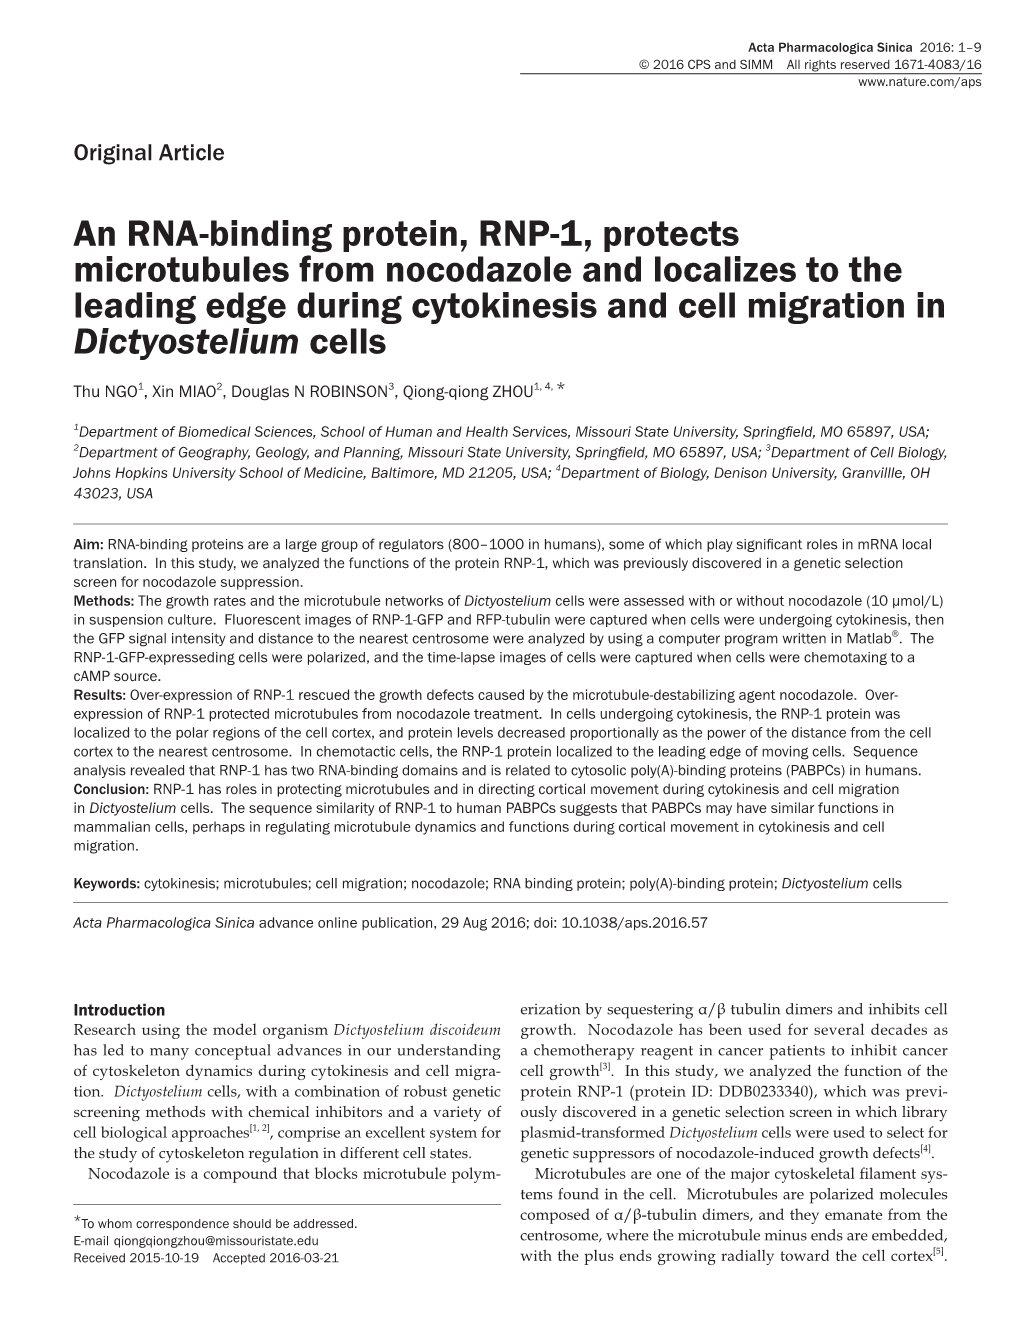 An RNA-Binding Protein, RNP-1, Protects Microtubules from Nocodazole and Localizes to the Leading Edge During Cytokinesis and Cell Migration in Dictyostelium Cells